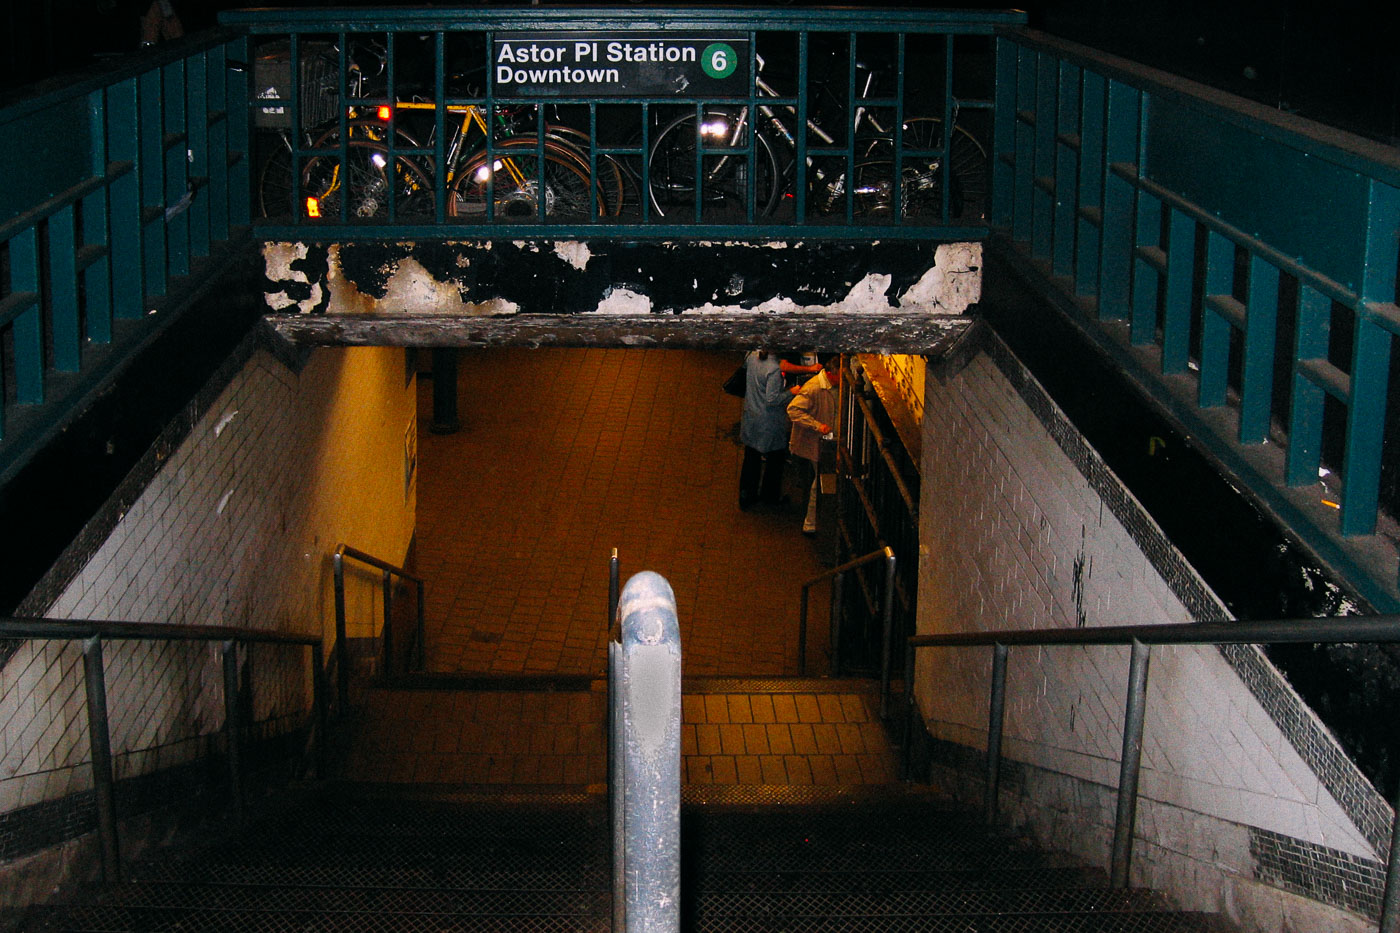 Stairs down to Astor Place subway station